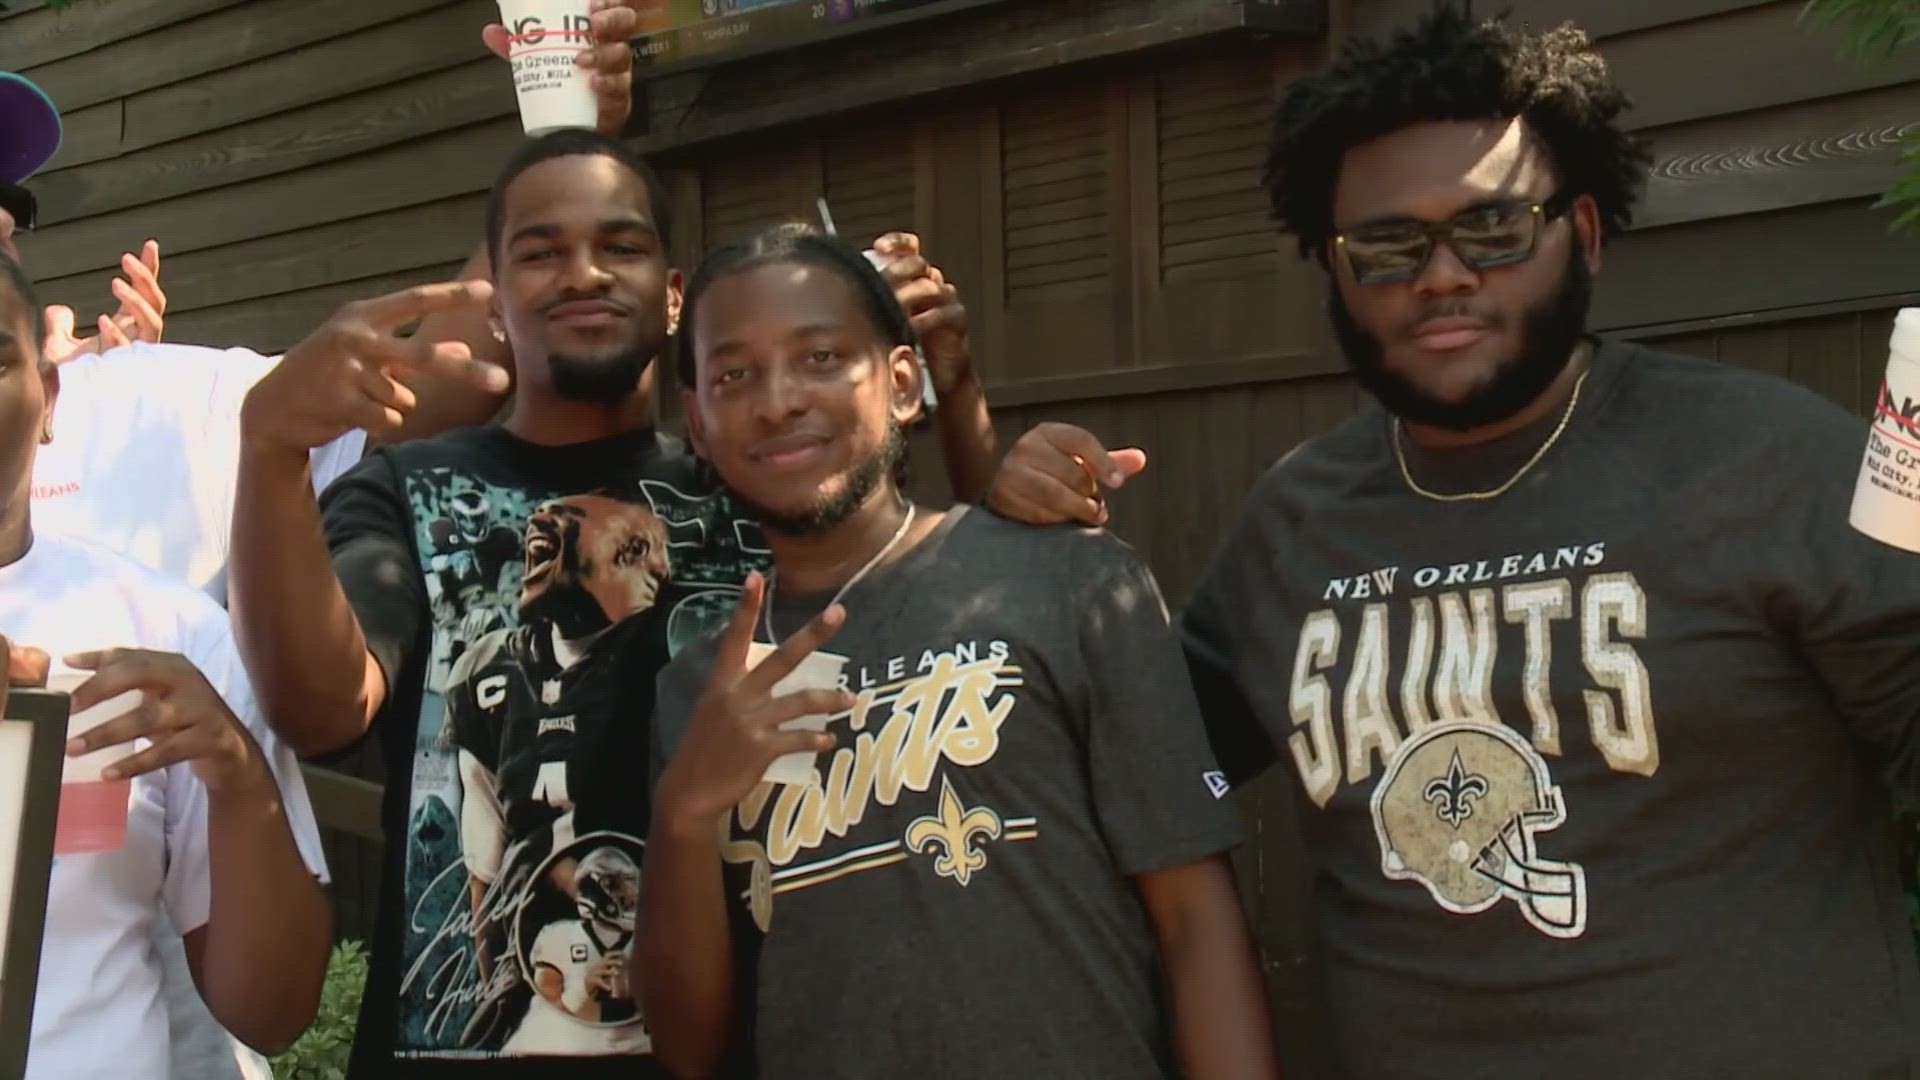 Saints fans in high spirits after season-opening win